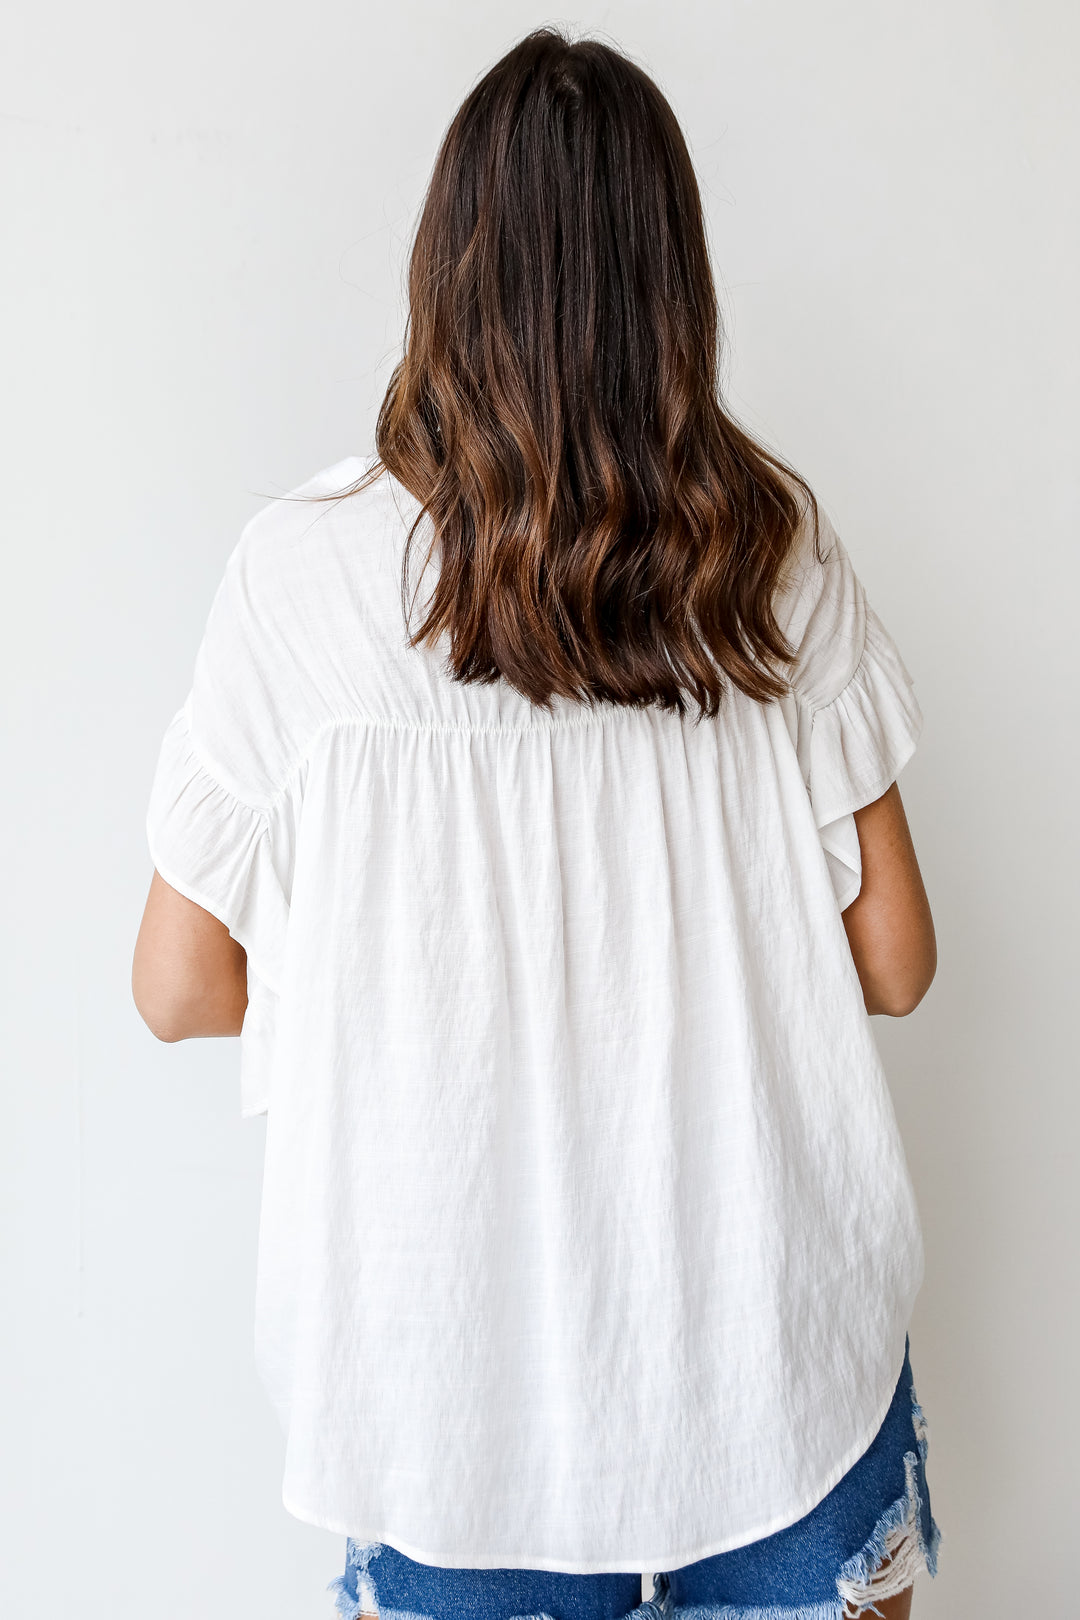 Ruffle Blouse in white back view